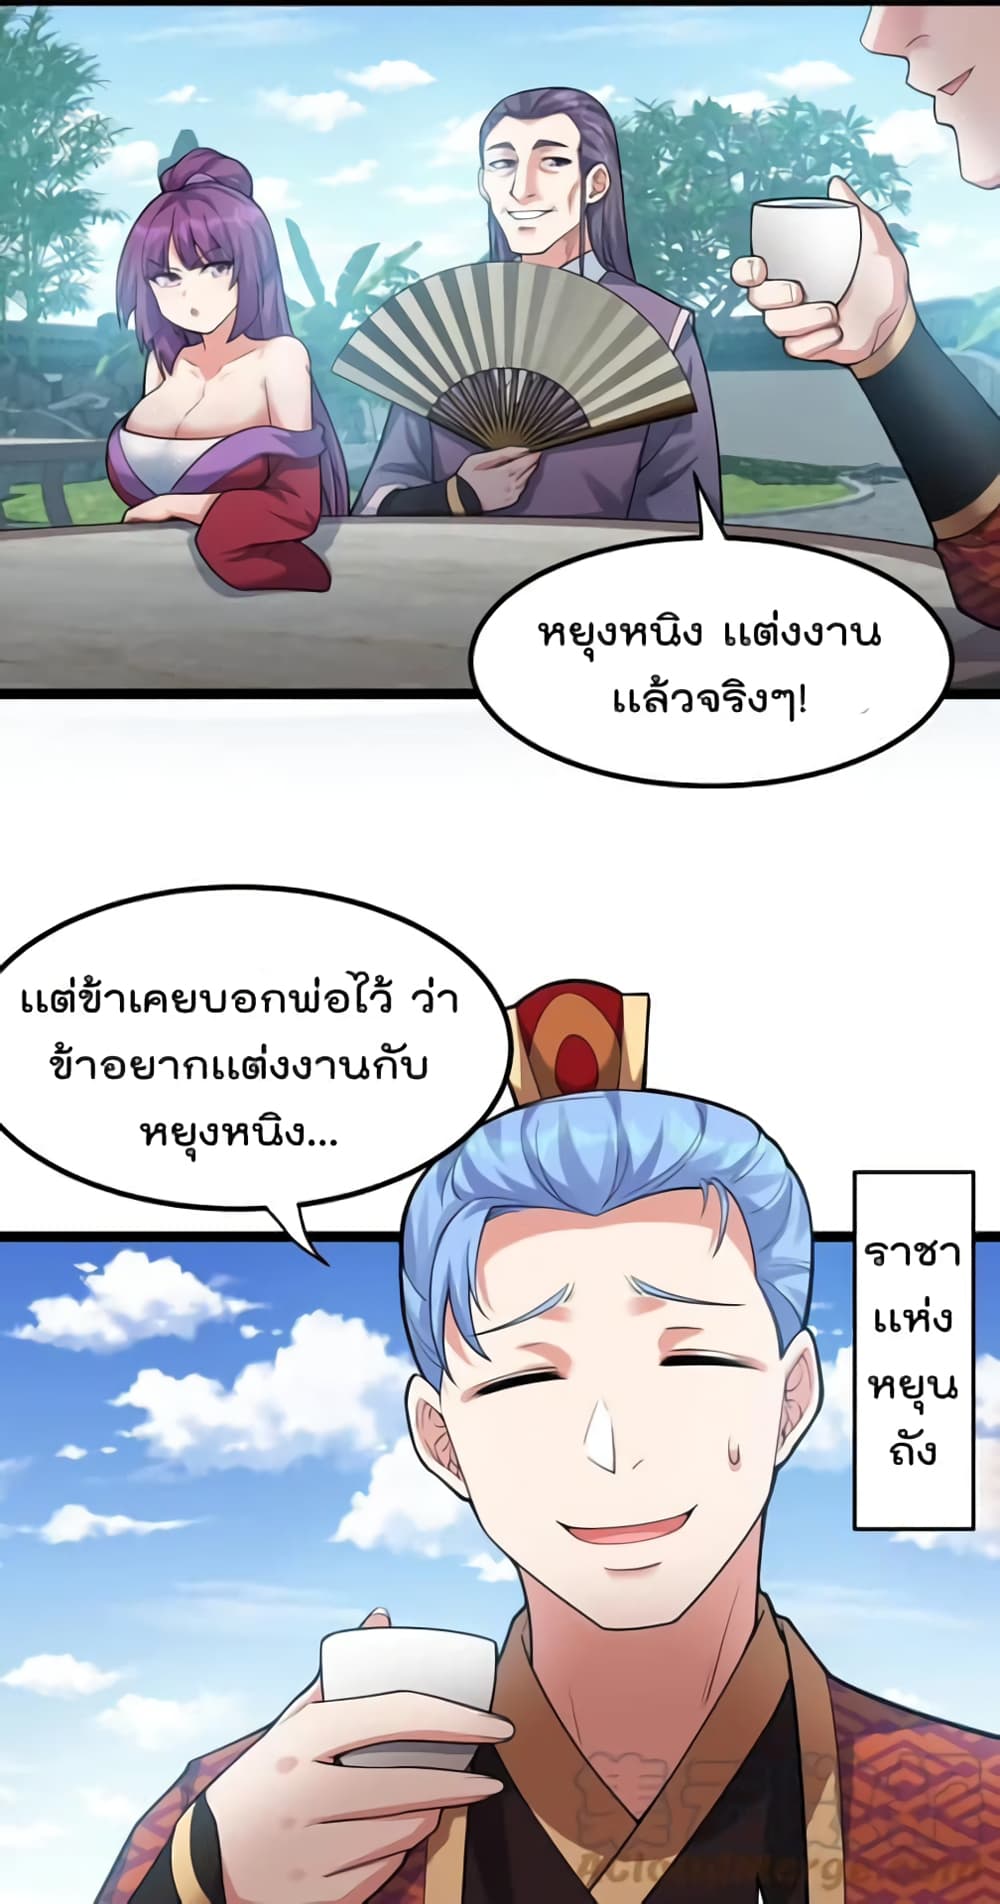 Godsian Masian from Another World ตอนที่ 114 (7)